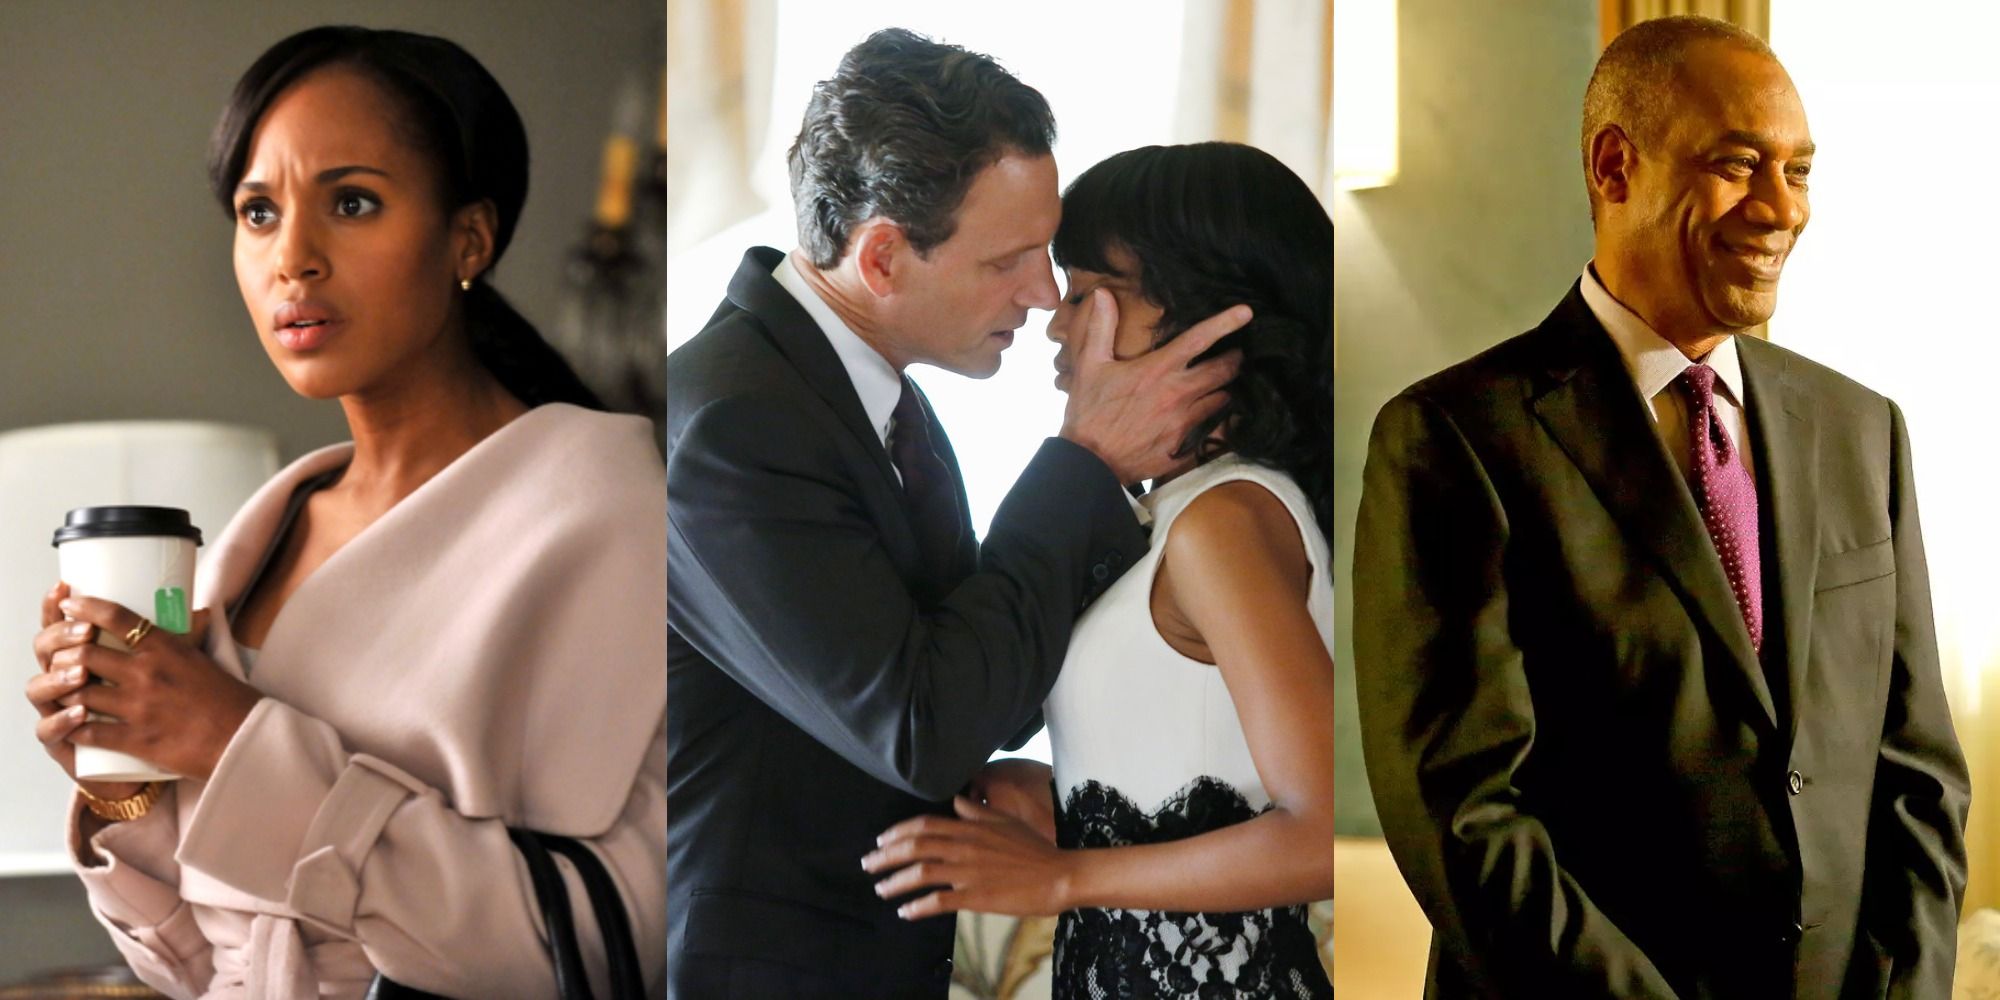 Three stills of characters from Scandal